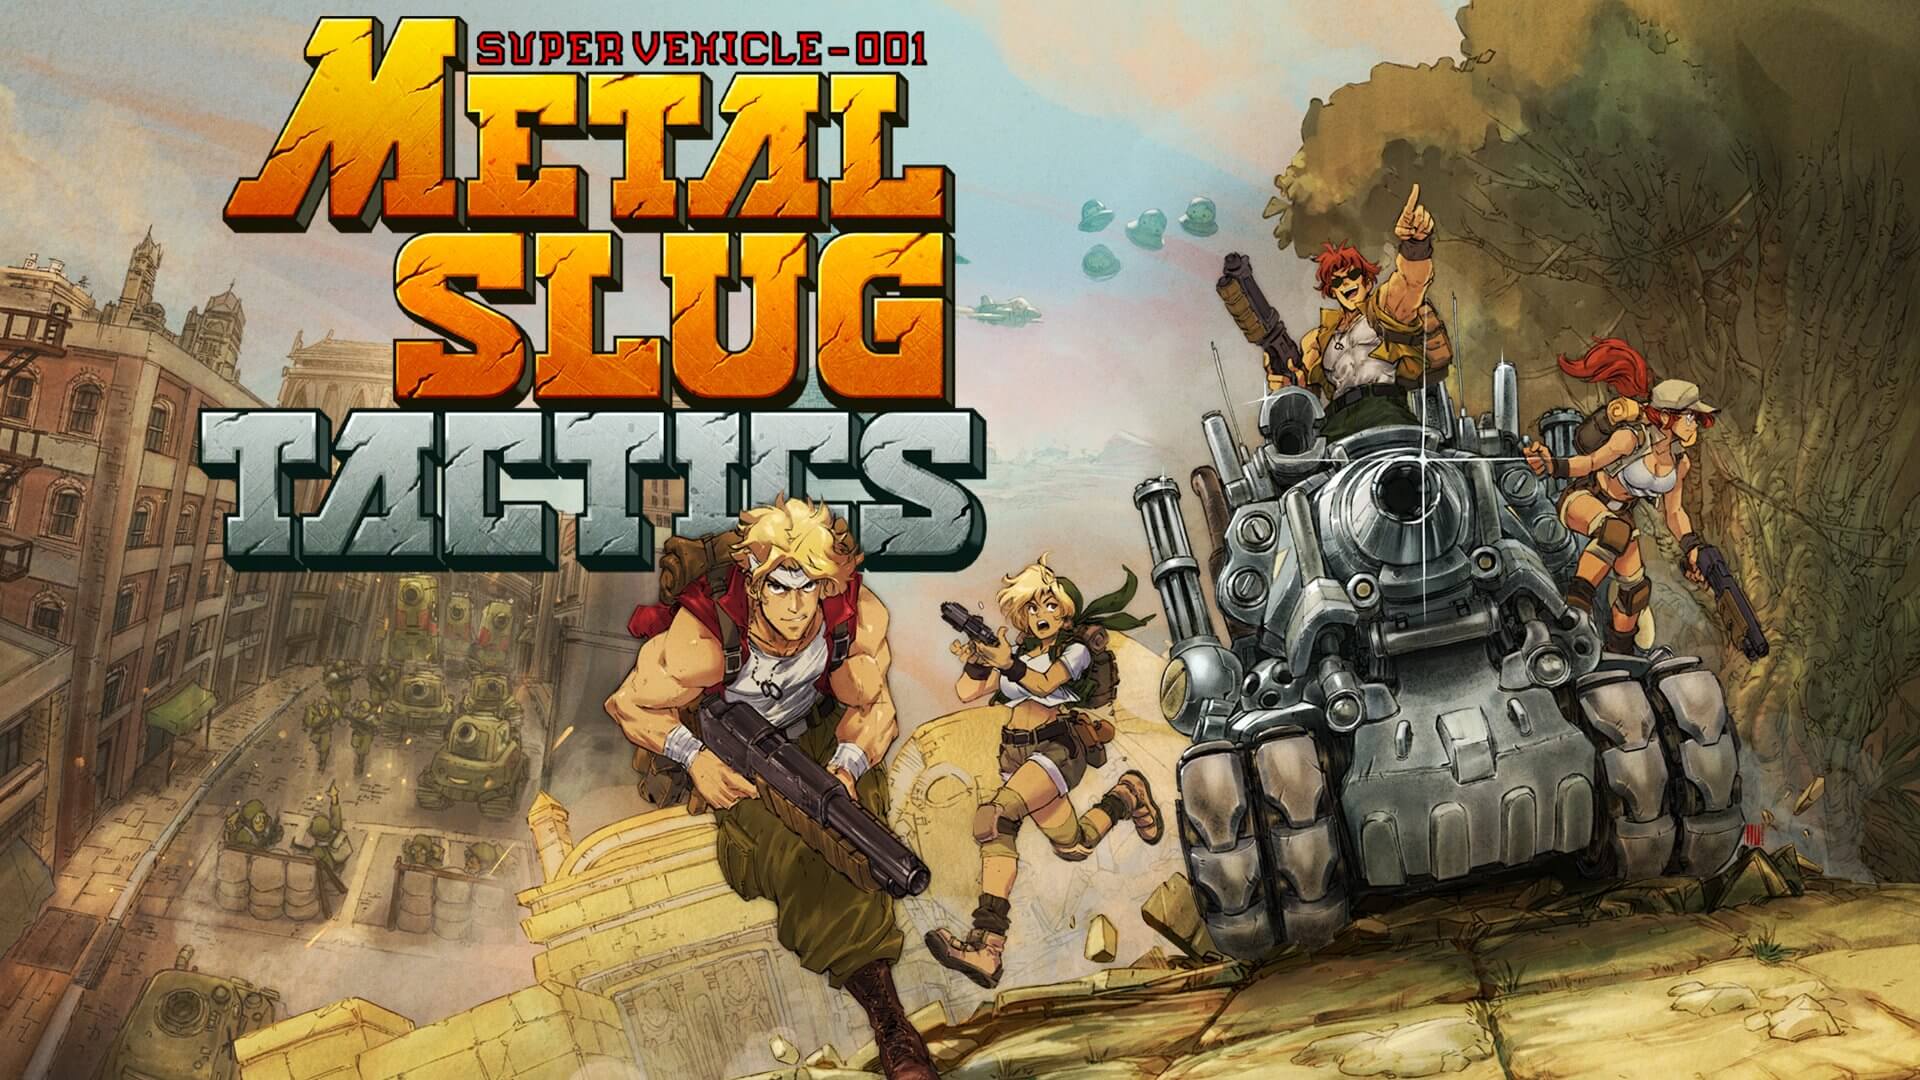 Metal Slug Tactics is a new gridbased tactical game for